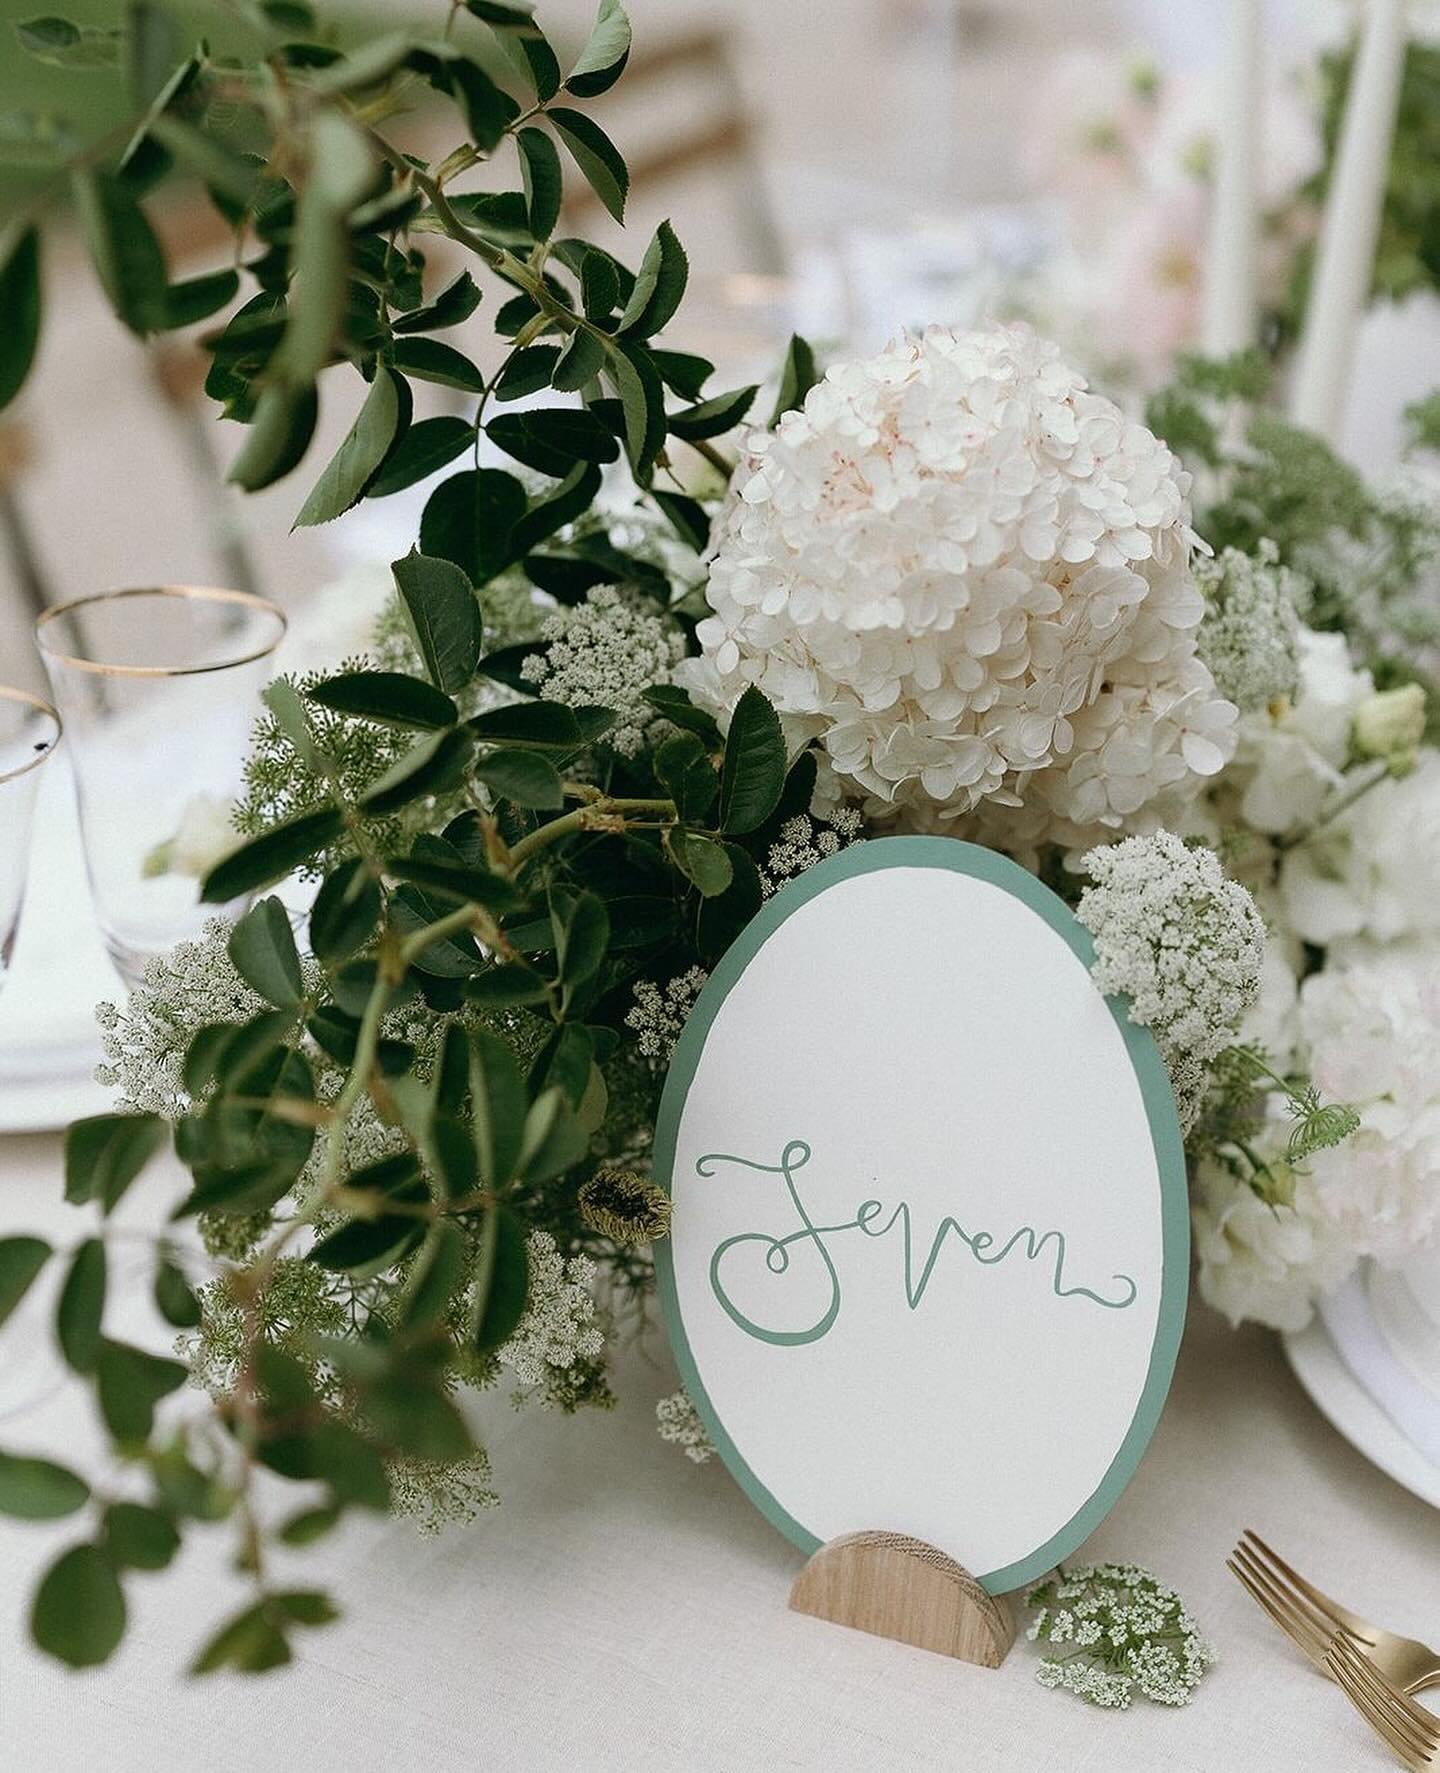 Unpopular opinion: Following wedding trends doesn&rsquo;t guarantee you&rsquo;ll have a stylish, timeless wedding⁠
⁠
At least, not in all cases!⁠
⁠
Here&rsquo;s why: ⁠
Chasing trends often leads to cookie-cutter weddings that are missing that somethi